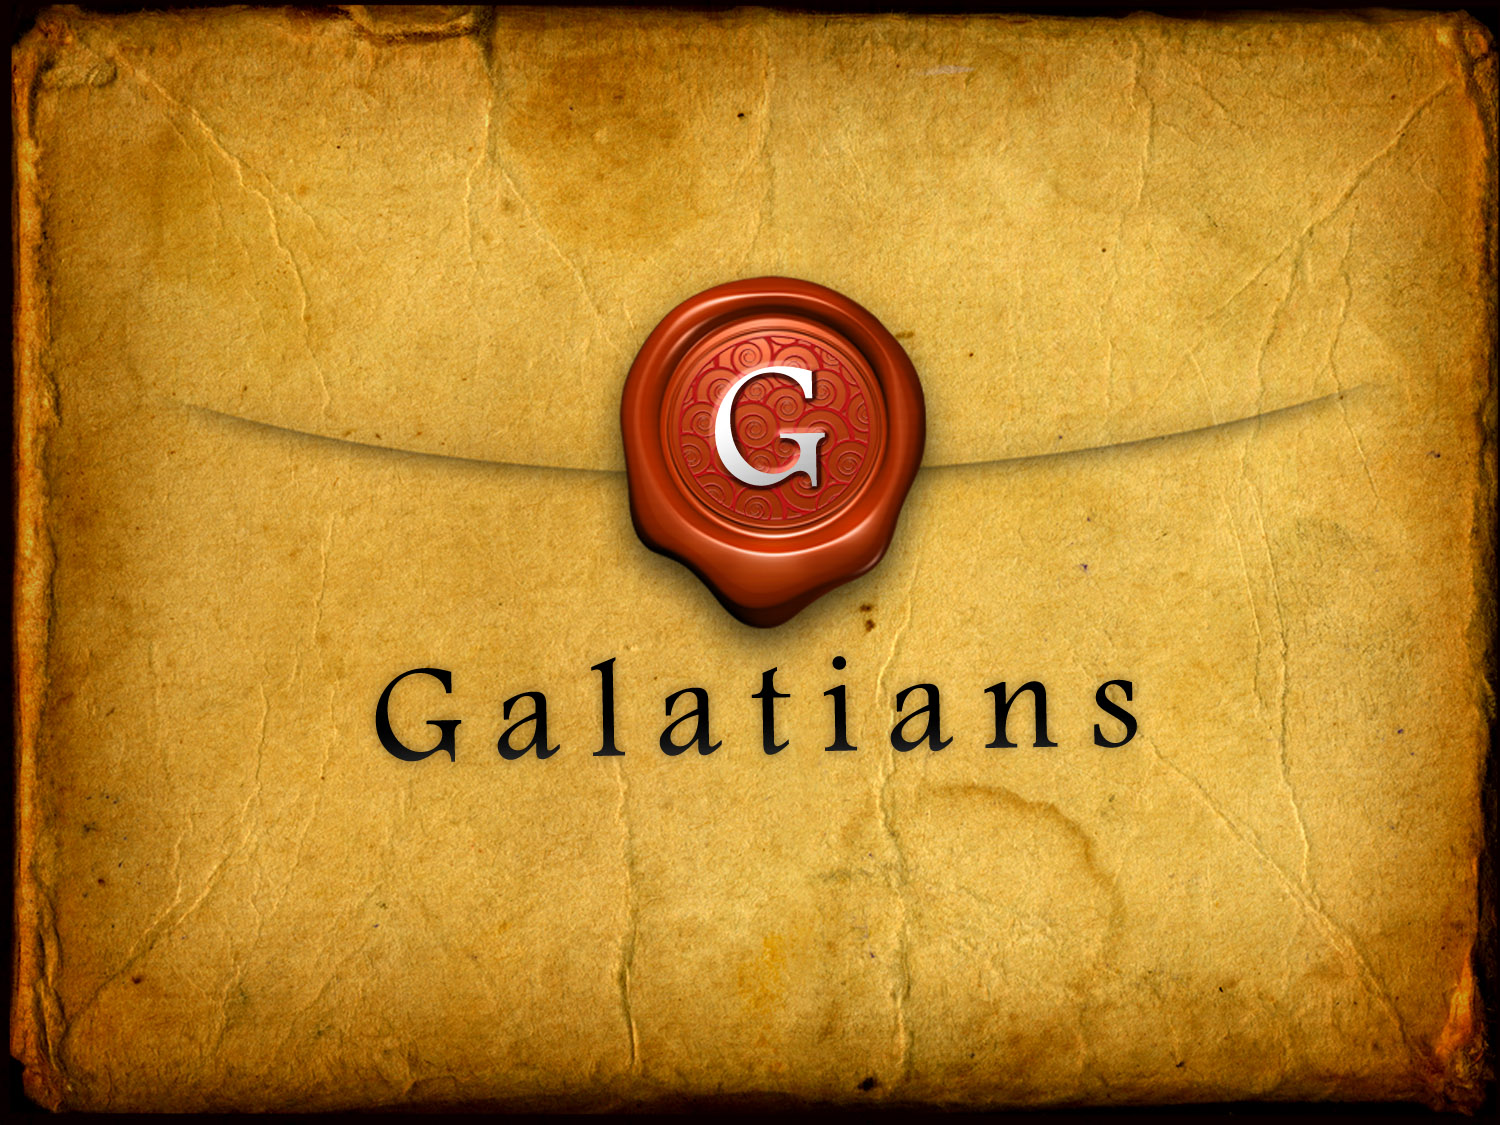 The Book of Galatians 5:5-9